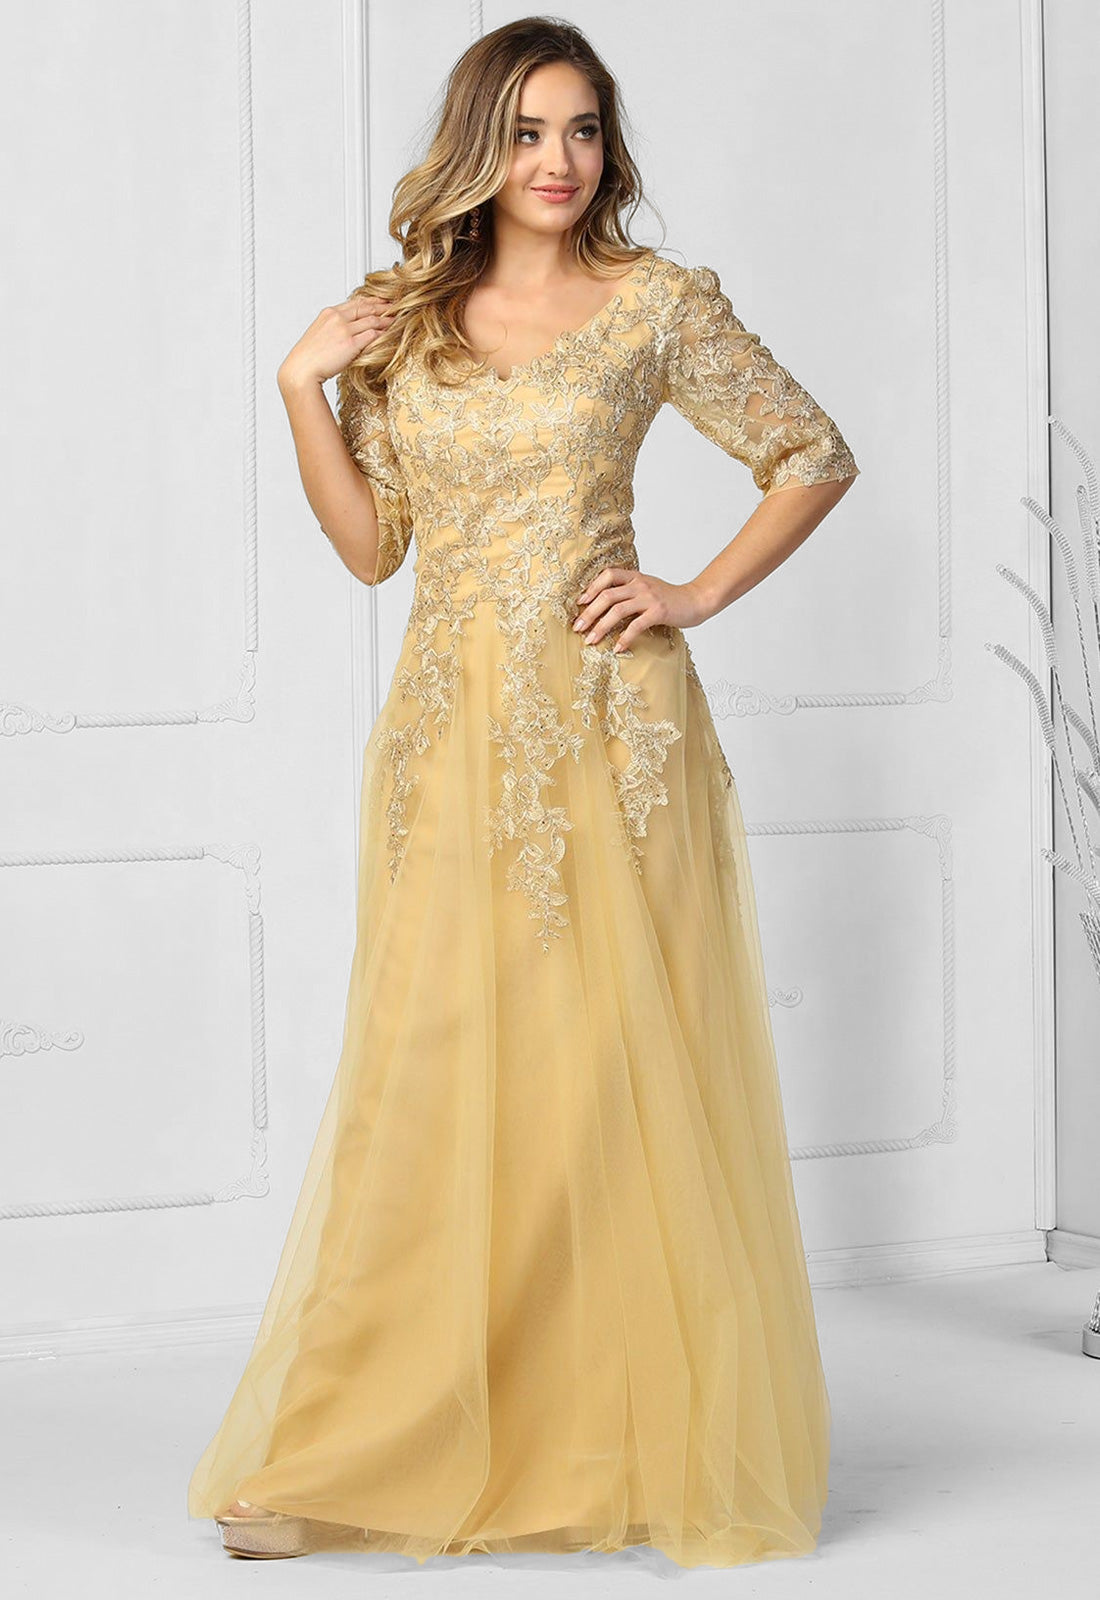 Shop Gold Formal Gowns. Prom, Plus Size